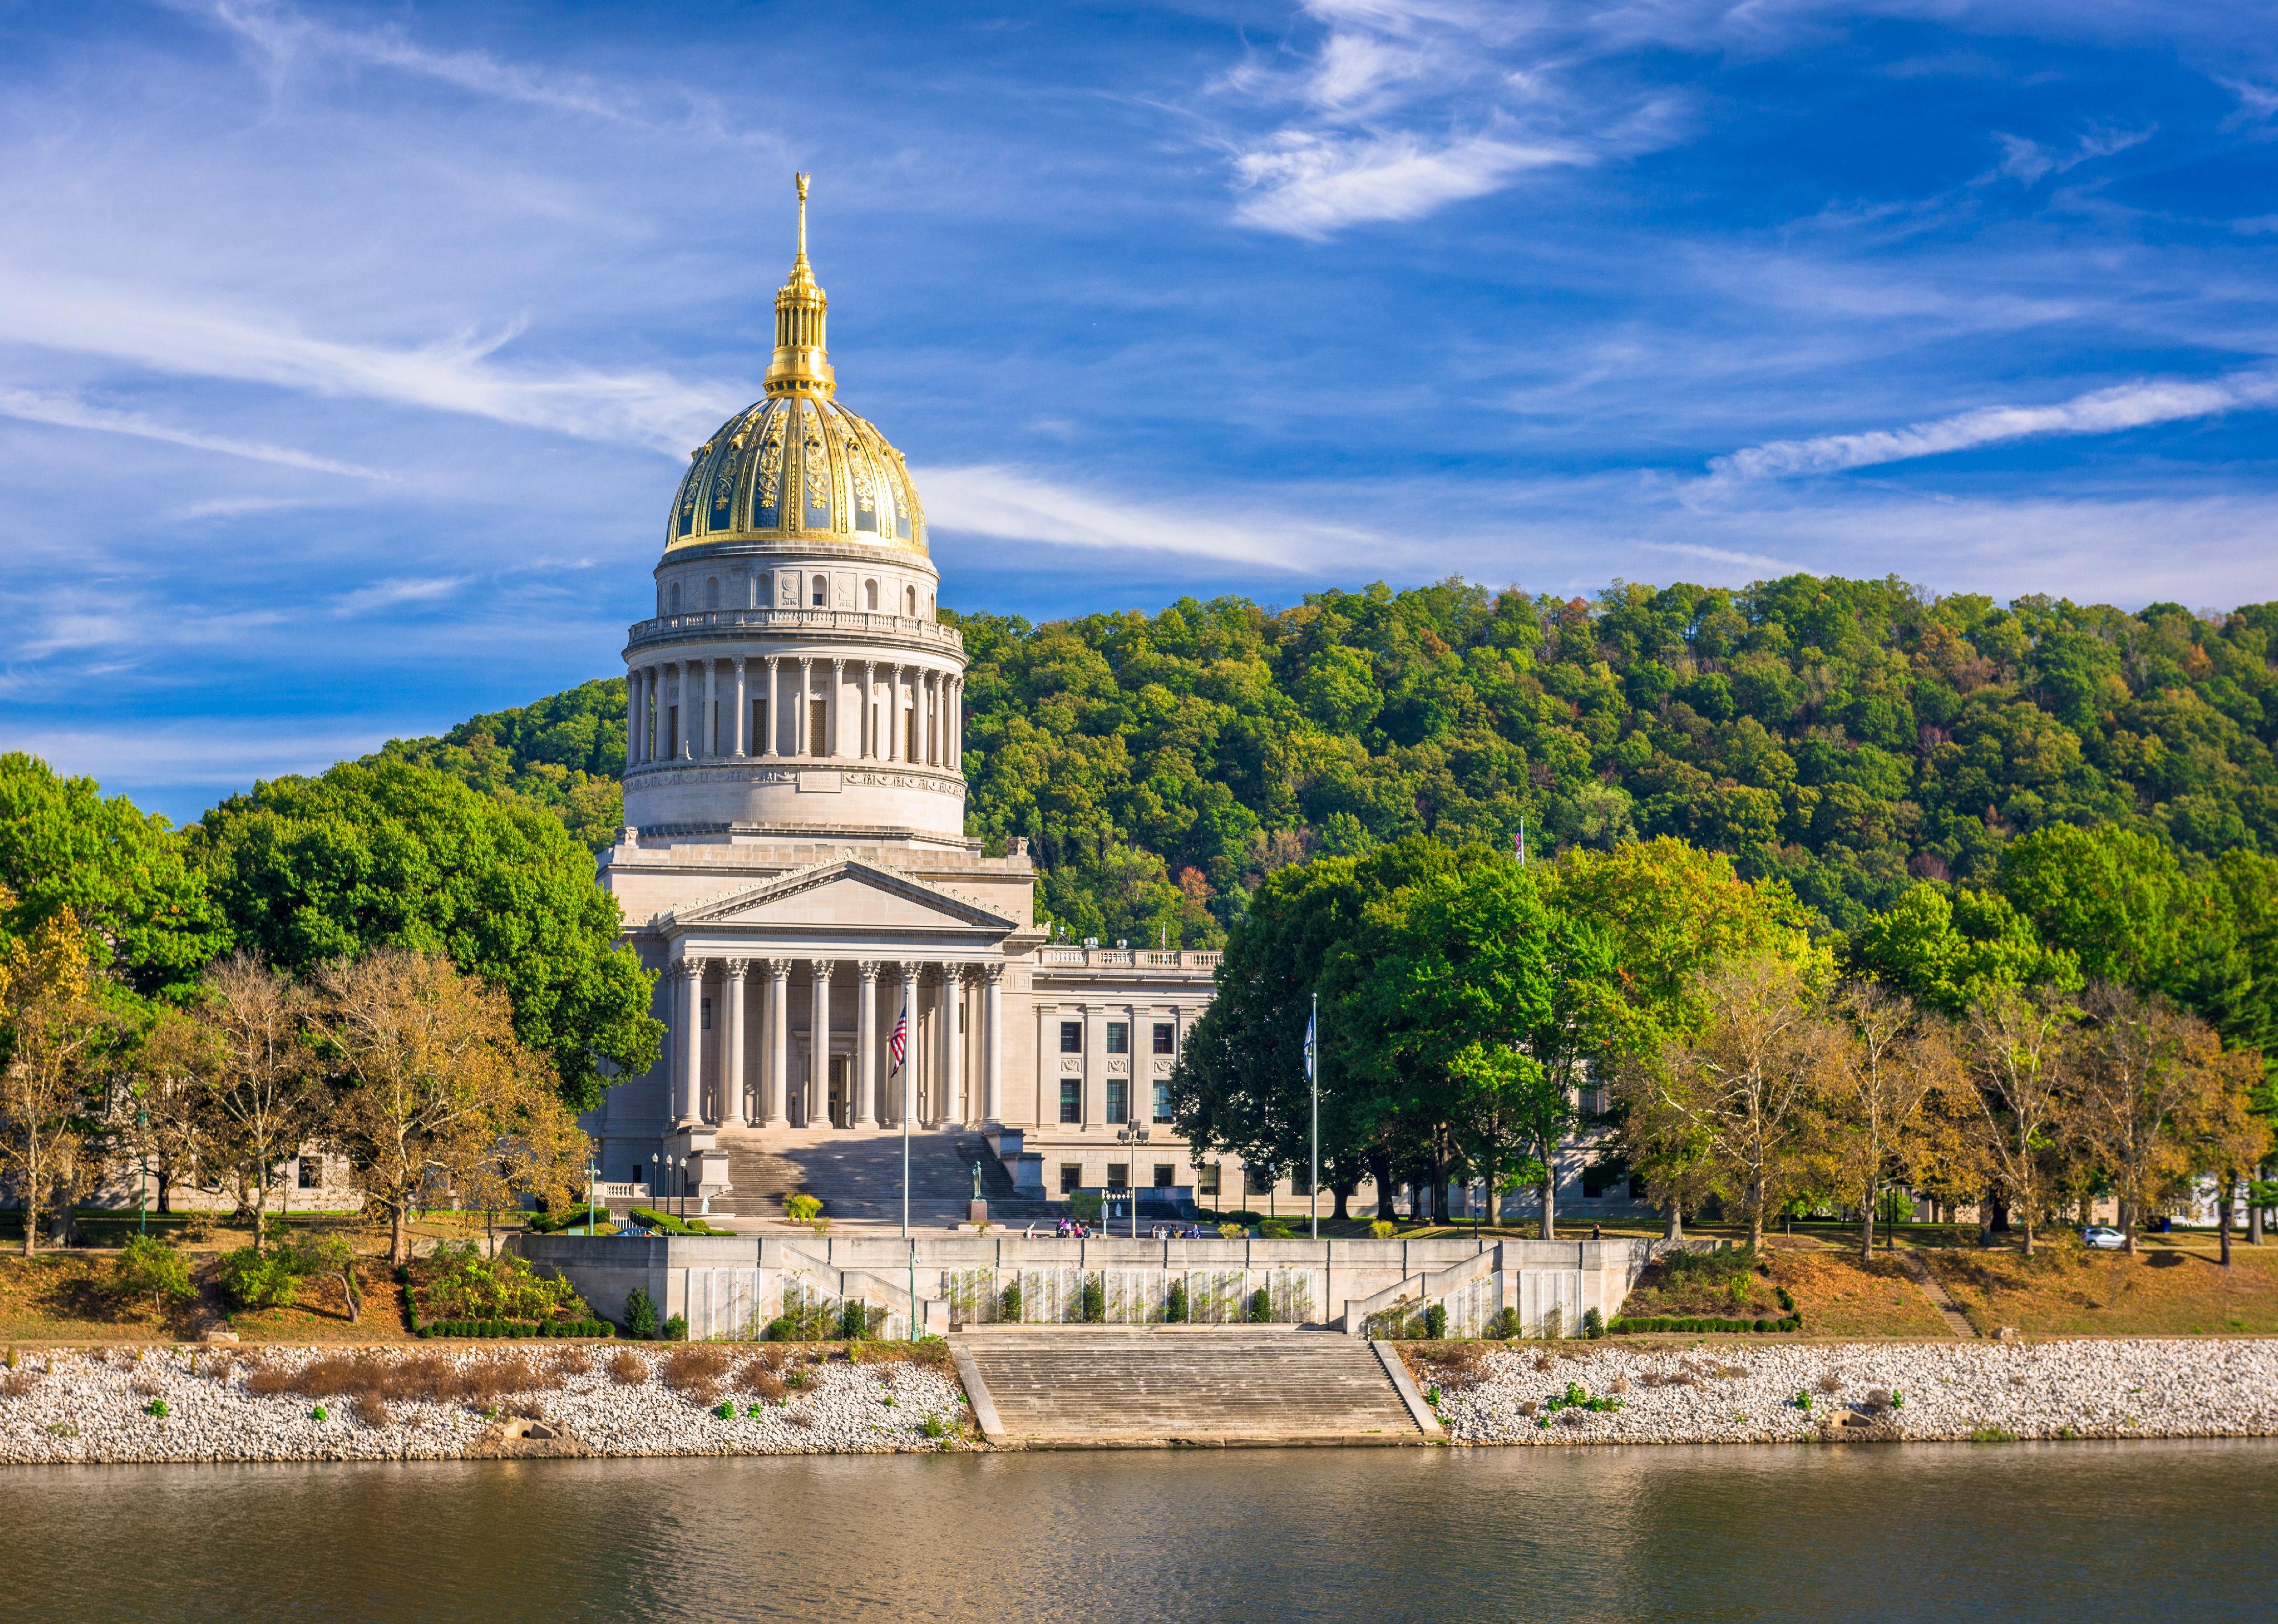 West Virginia State Capitol on the Kanawha River in Charleston, West Virginia.